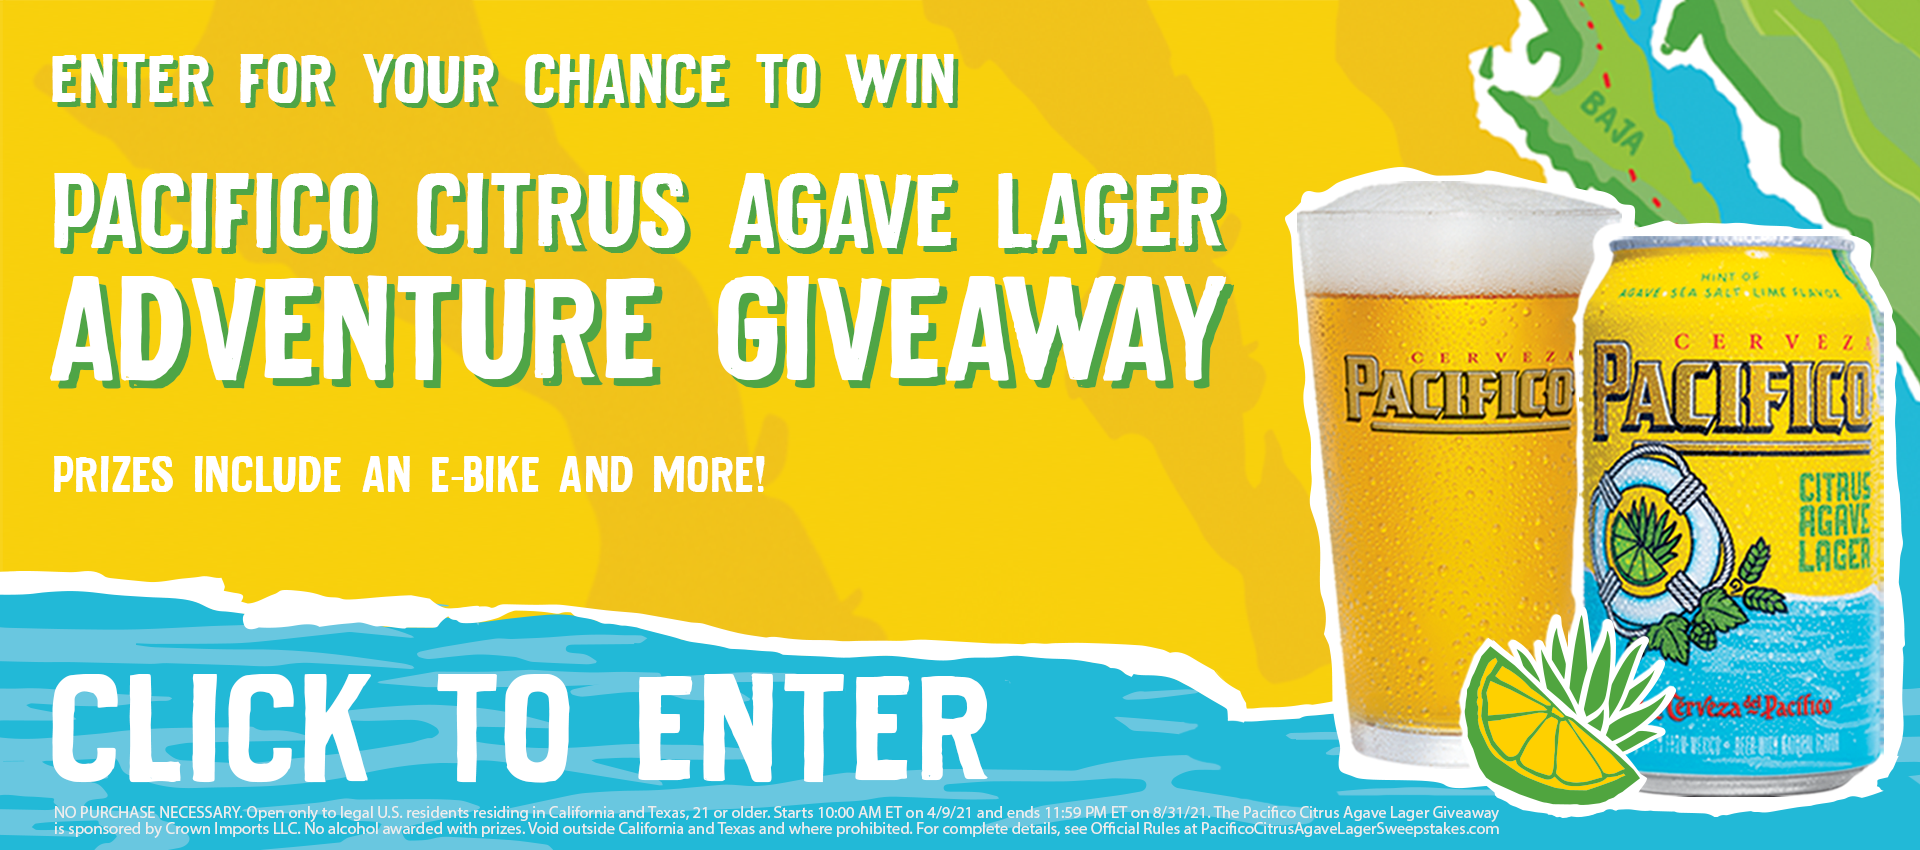 Pacifico Citrus Agave Lager Adventure Giveaway